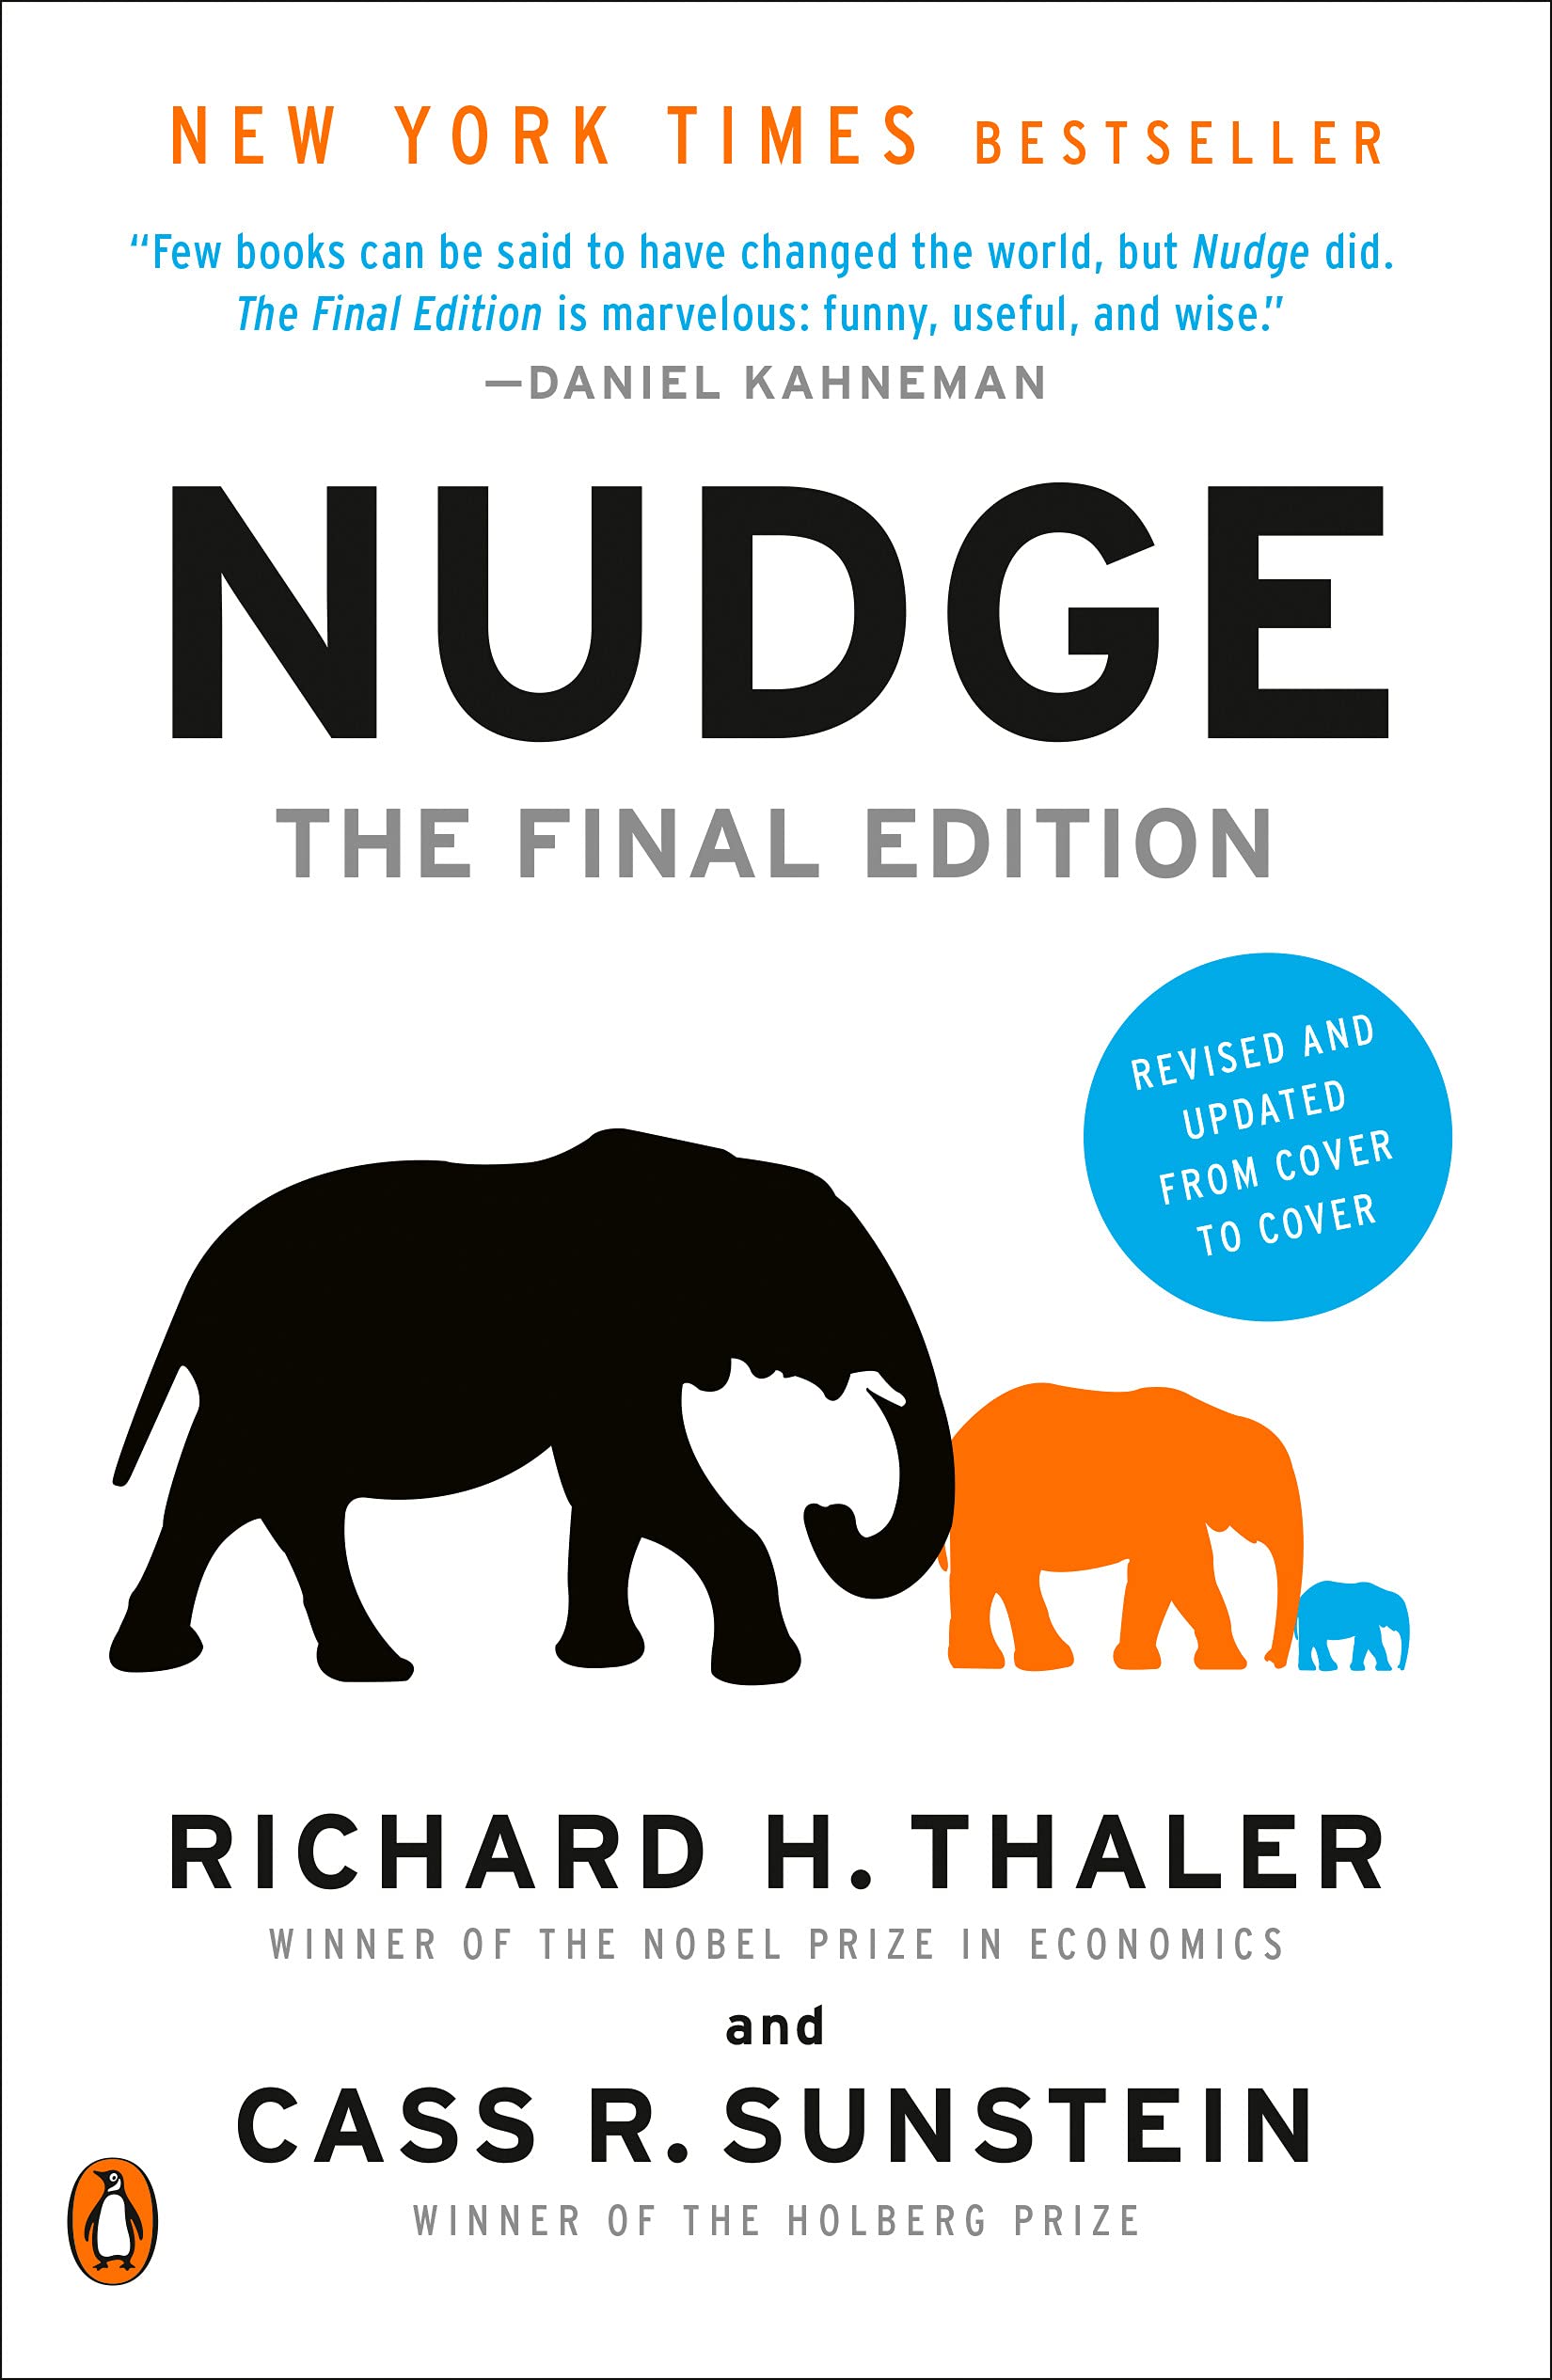 « Nudge: Improving Decisions About Health, Wealth, and Happiness » de Richard H. Thaler et Cass R. Sunstein (2008)